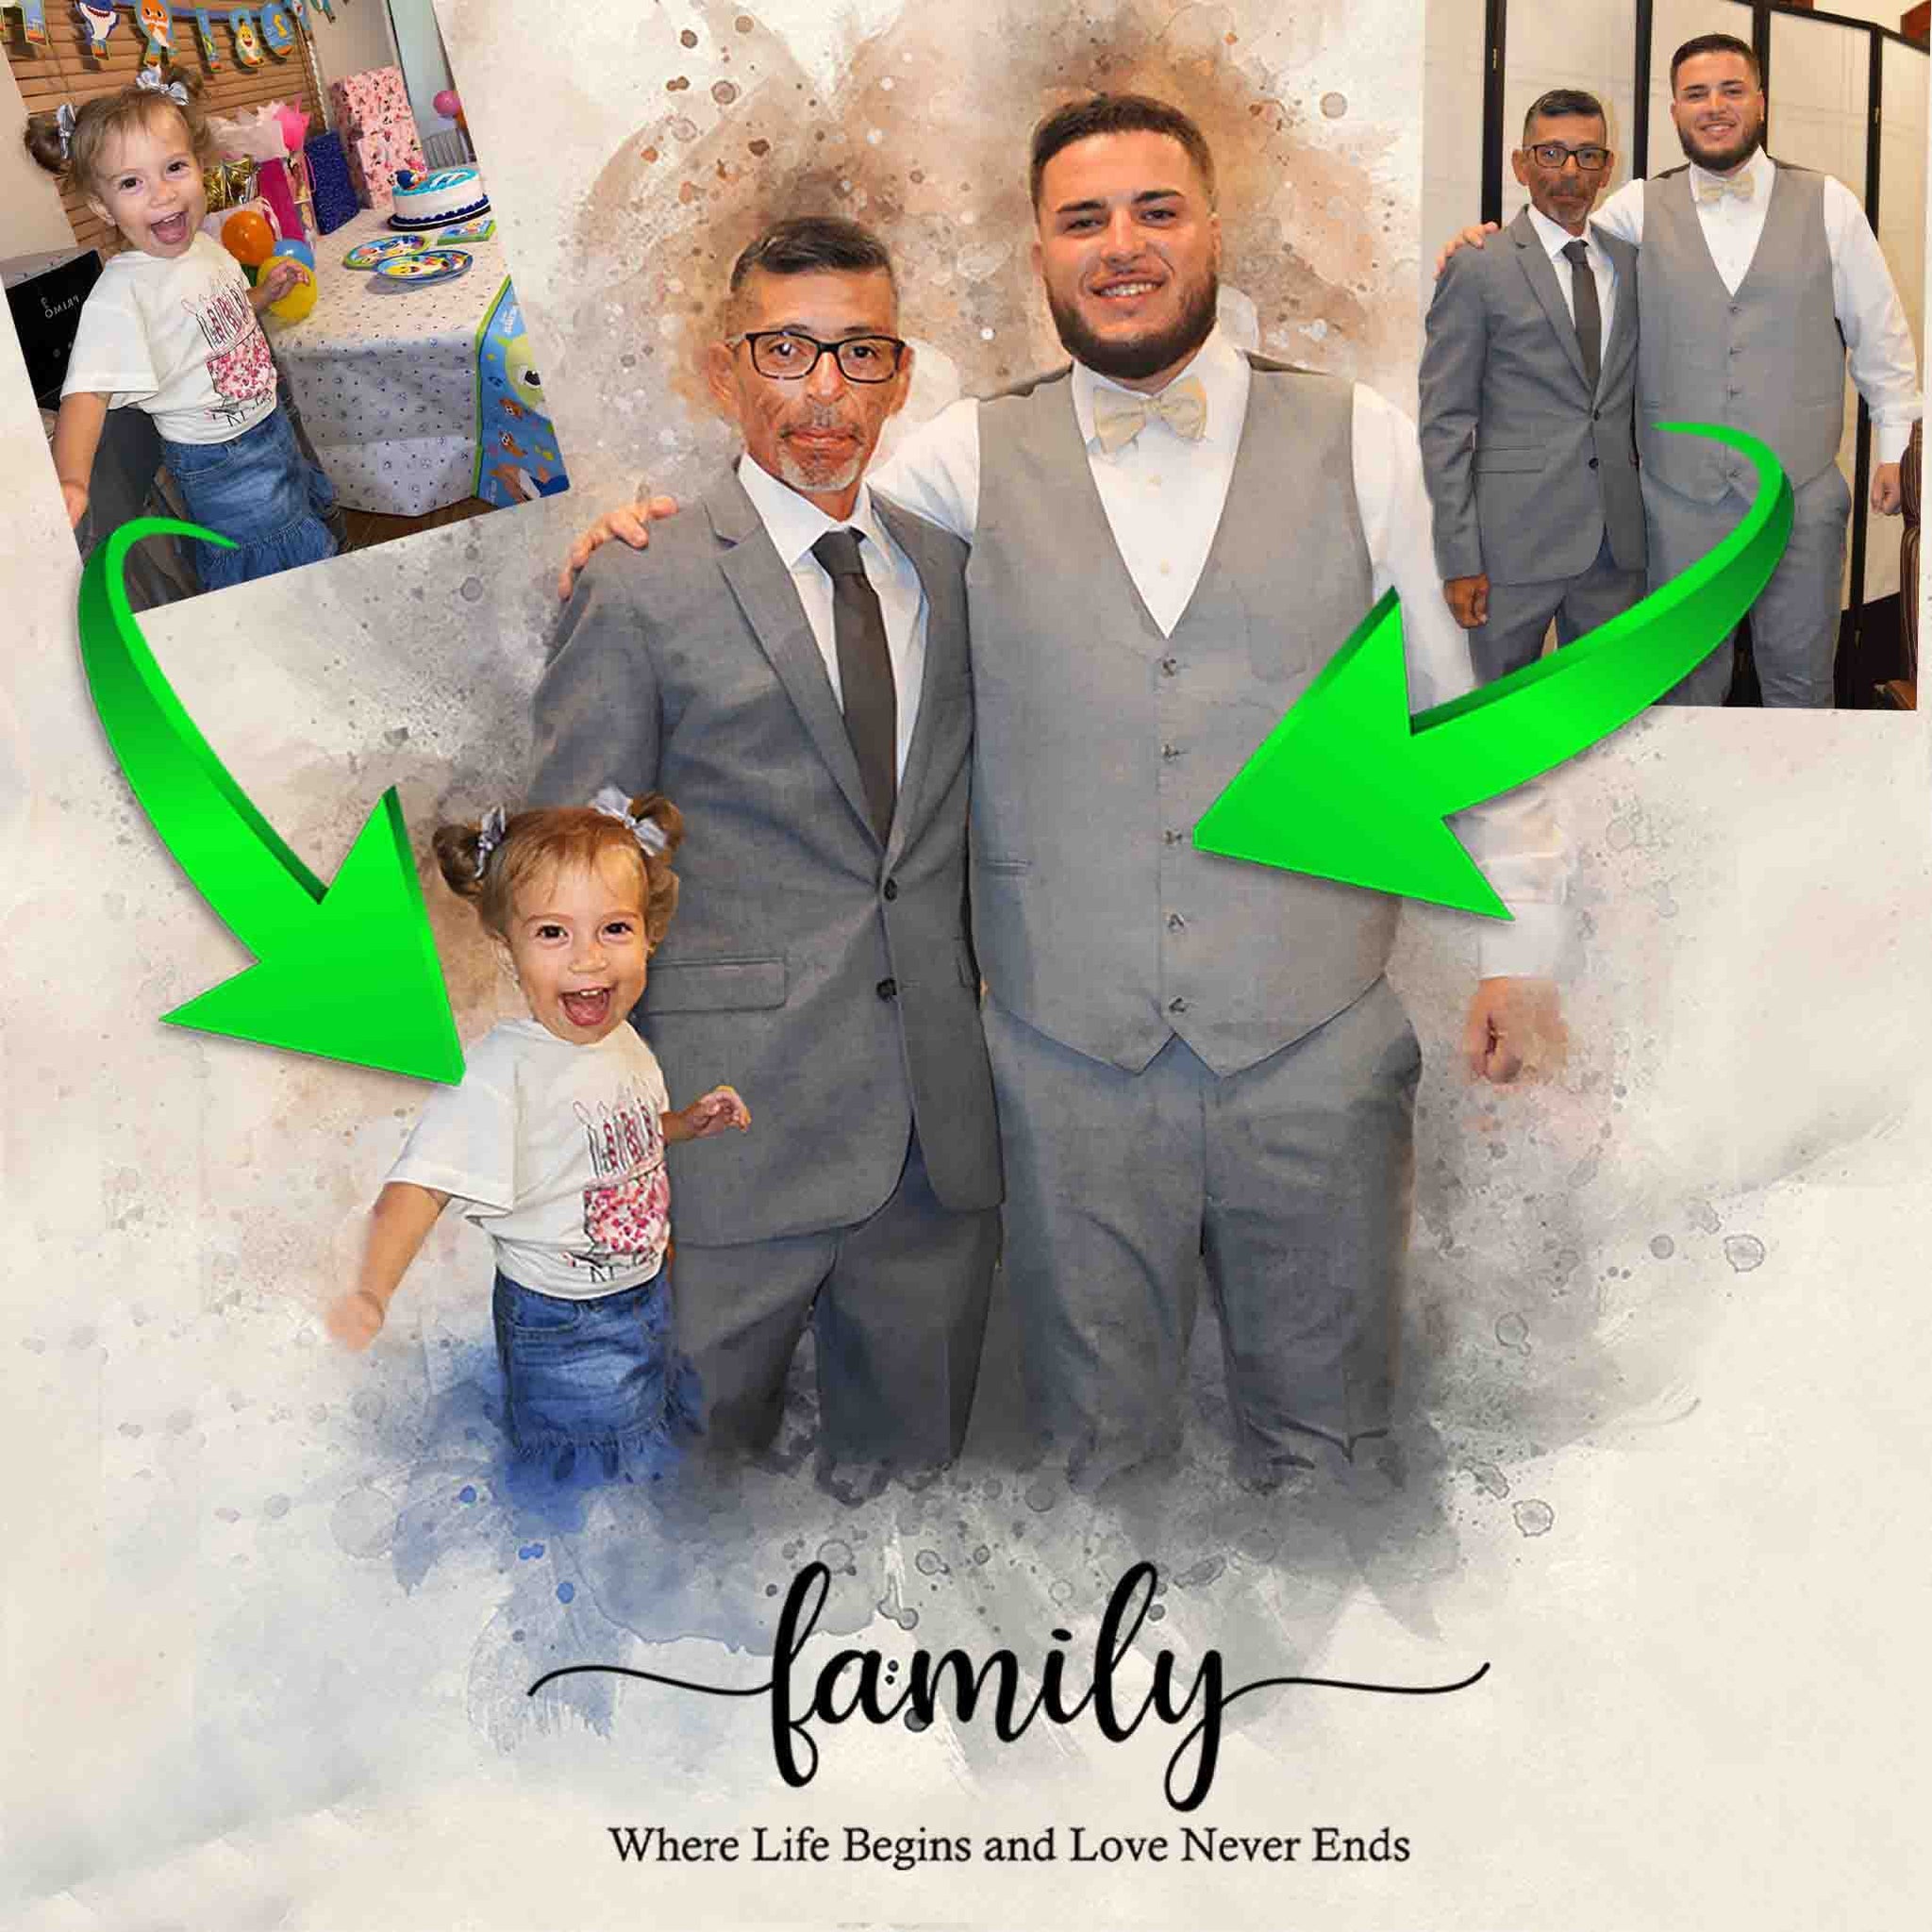 Add Someone in a Picture, Custom-Made Picture with Loved One in Background, Add People into a Picture - FromPicToArt